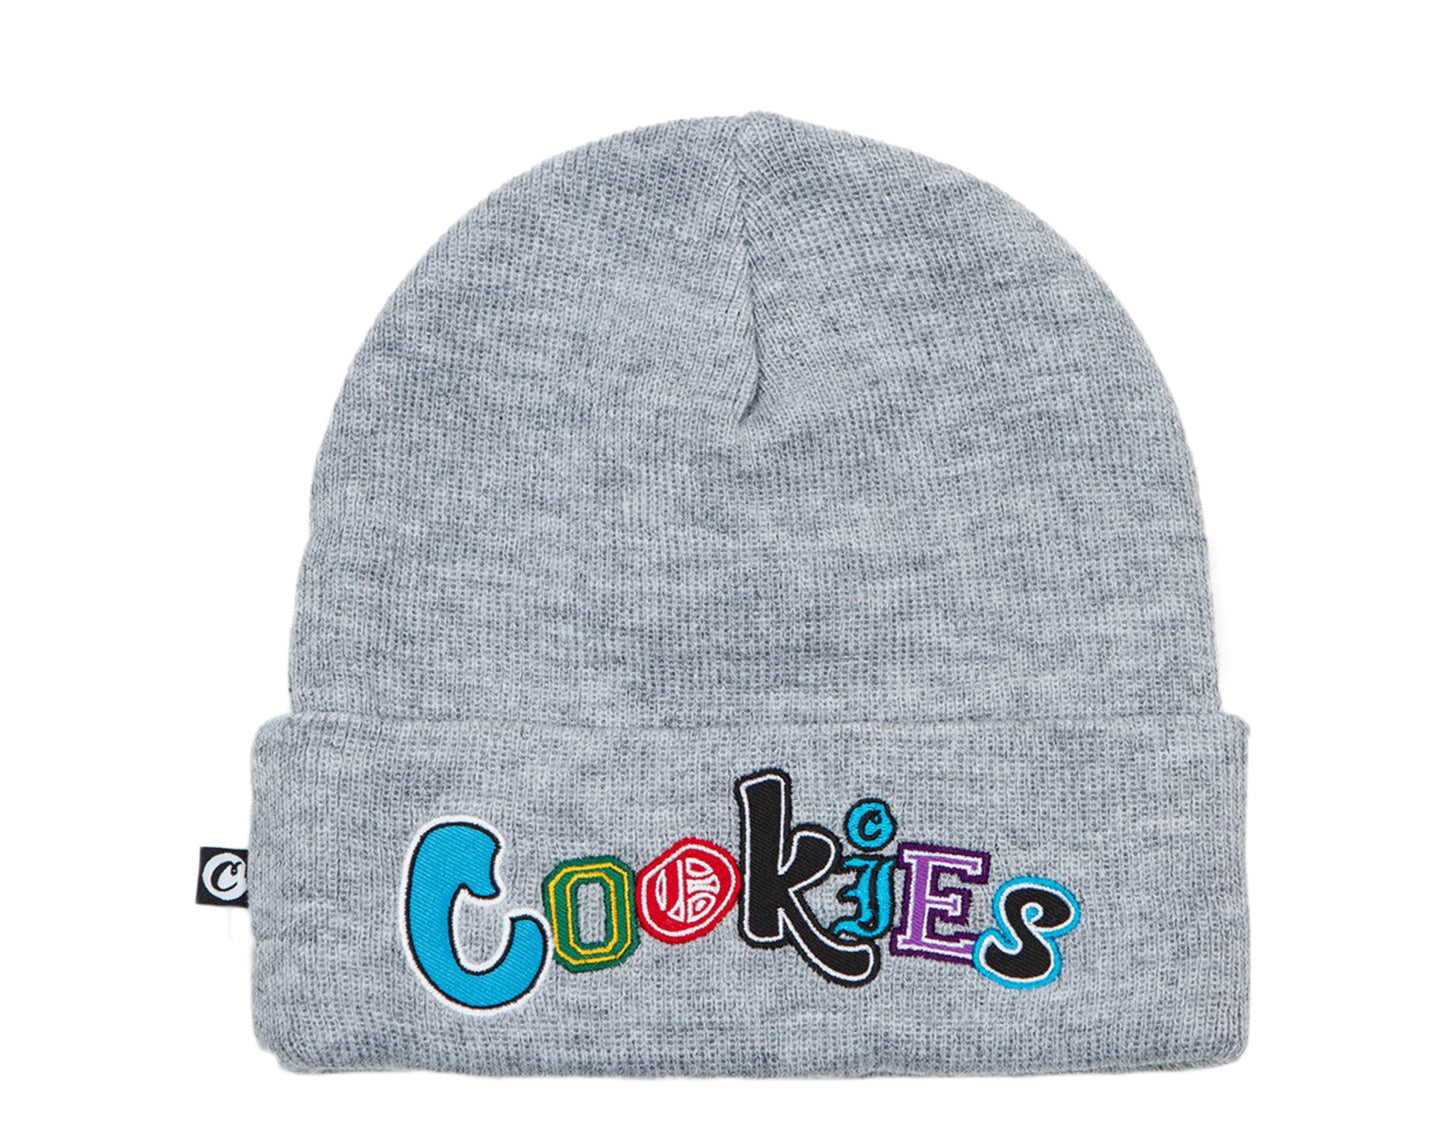 Cookies City Limits Multi-Color Logo Knit Grey Beanie Hat 1545X4124-GRY